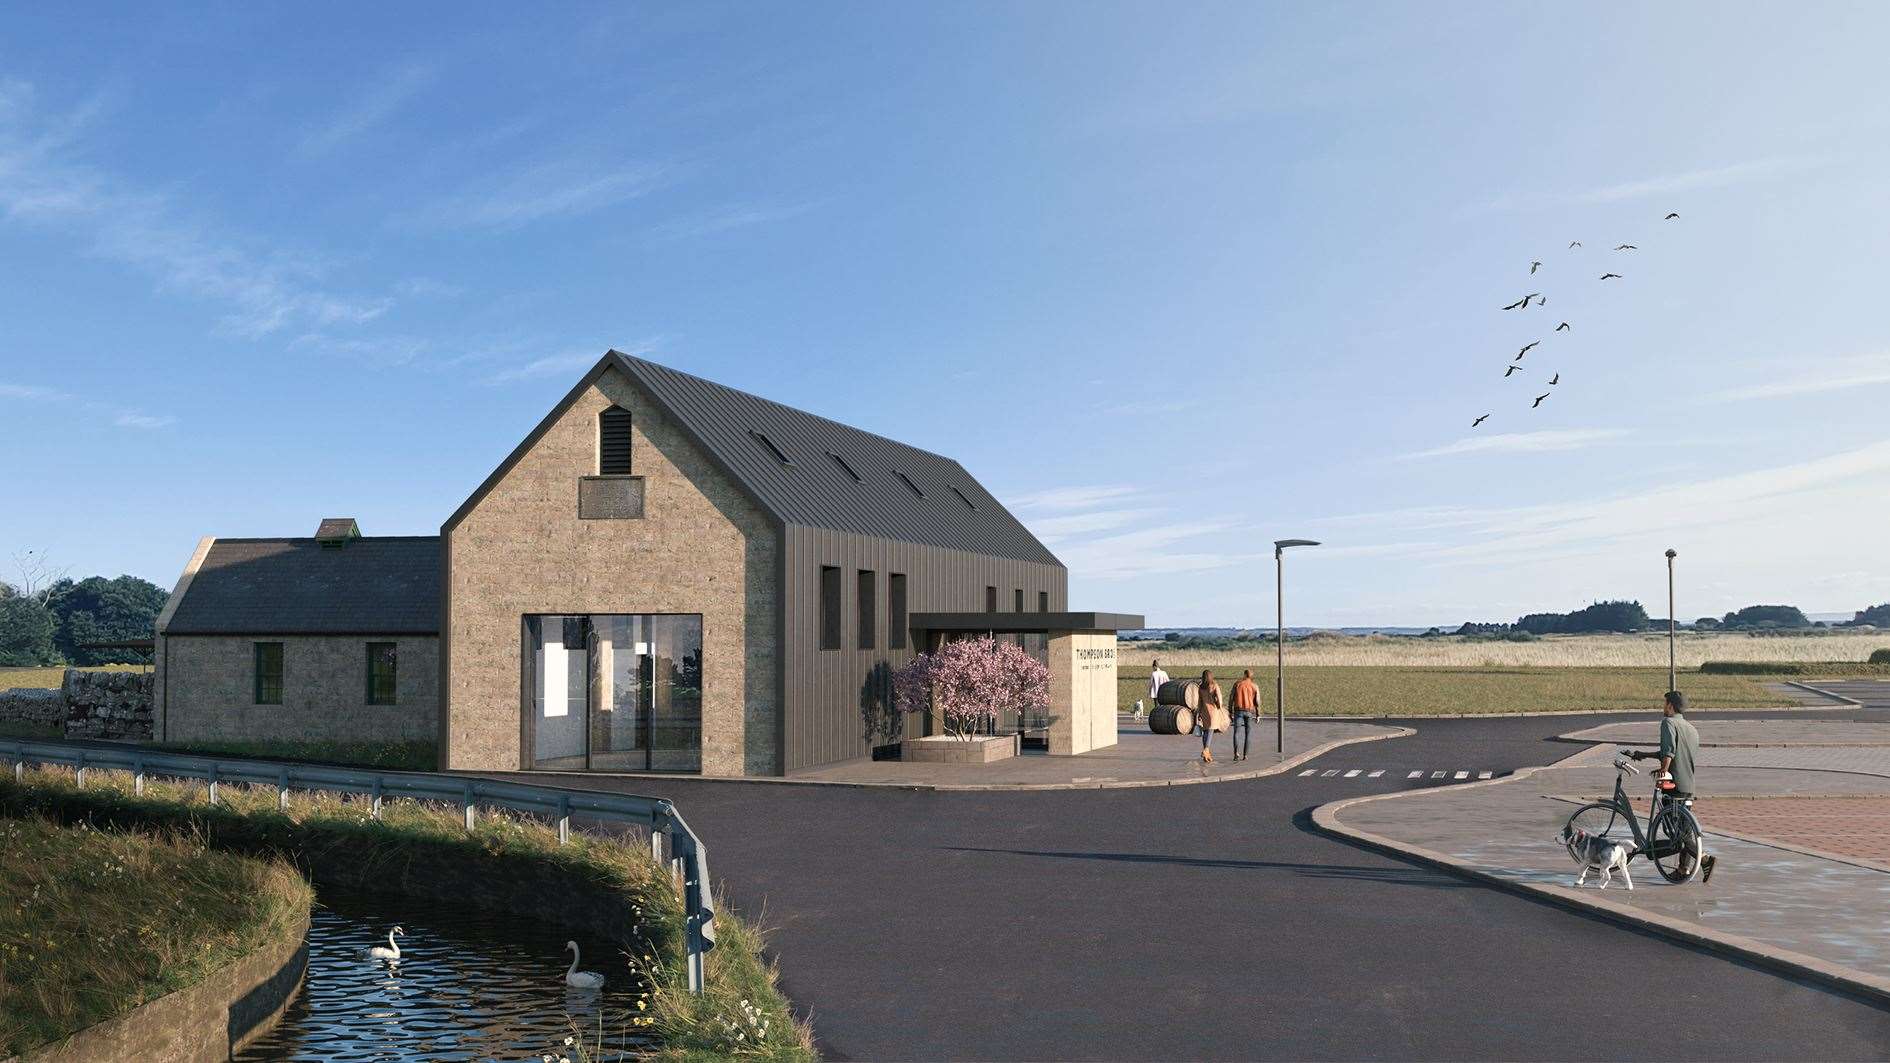 Planning consent for the new distillery required approval from Scottish Ministers after an objection from SEPA.